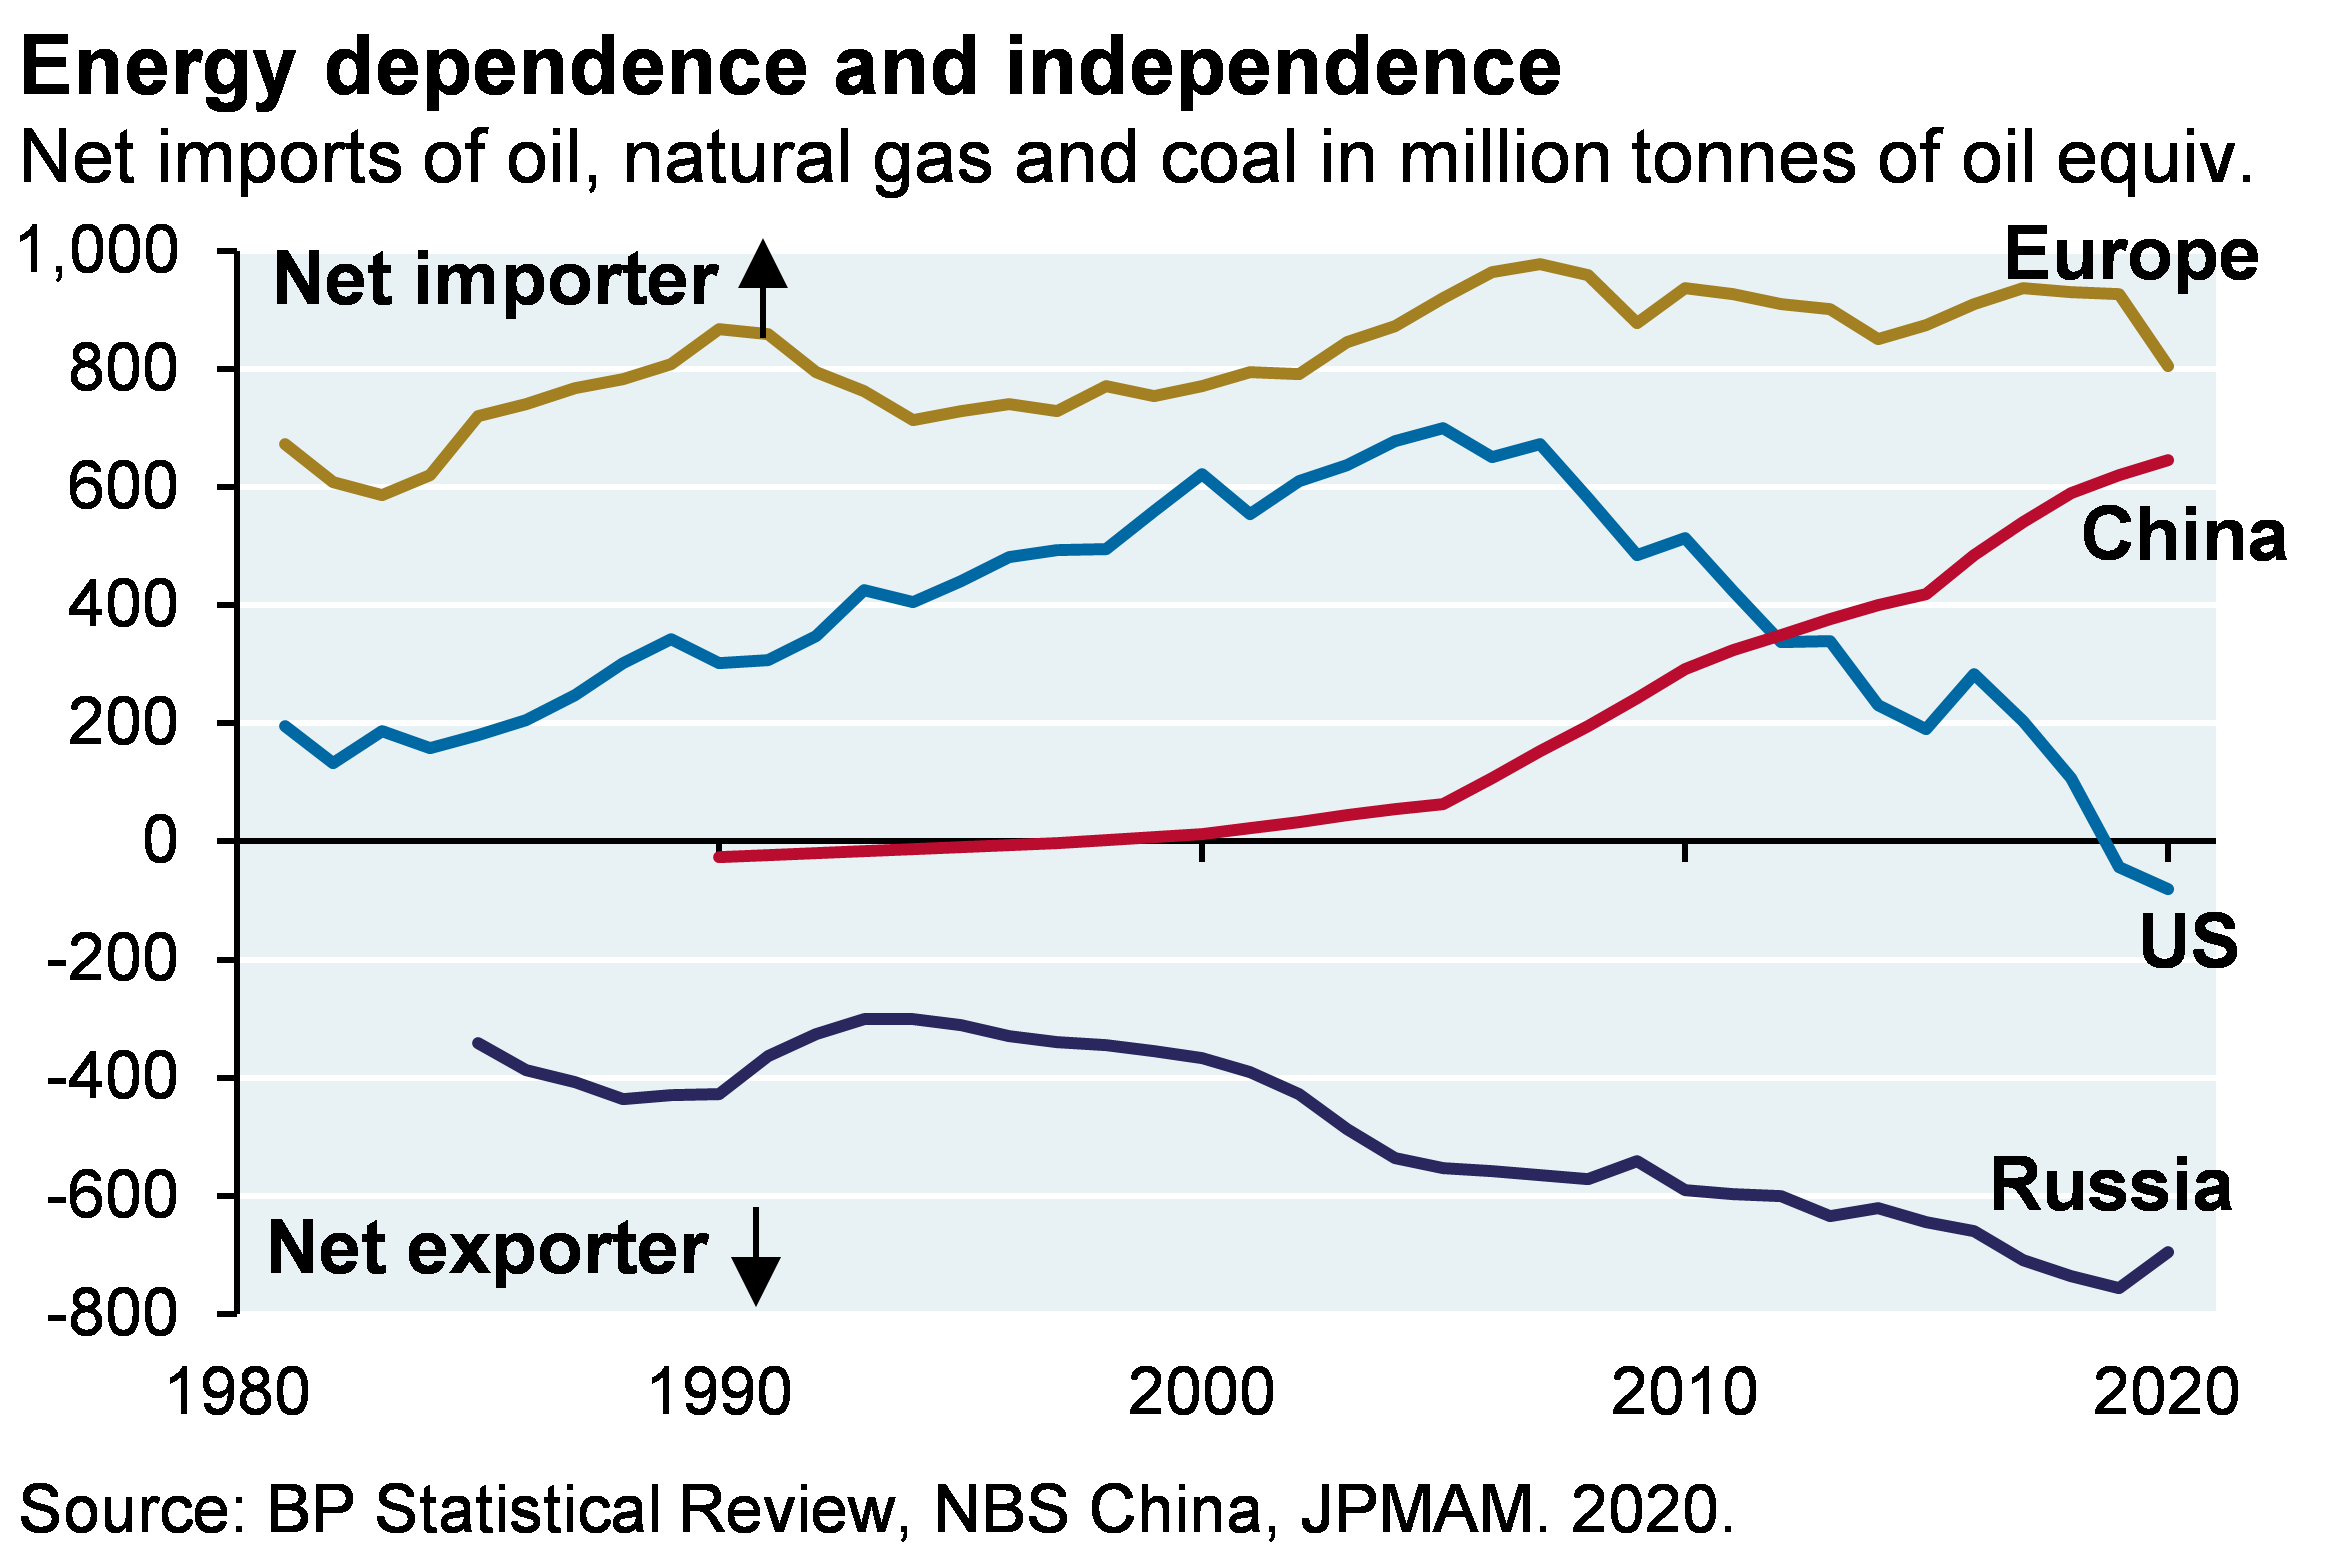 Line chart which shows net imports of oil, natural gas and coal in million tonnes of oil equivalent for Europe, China, the US and Russia. 